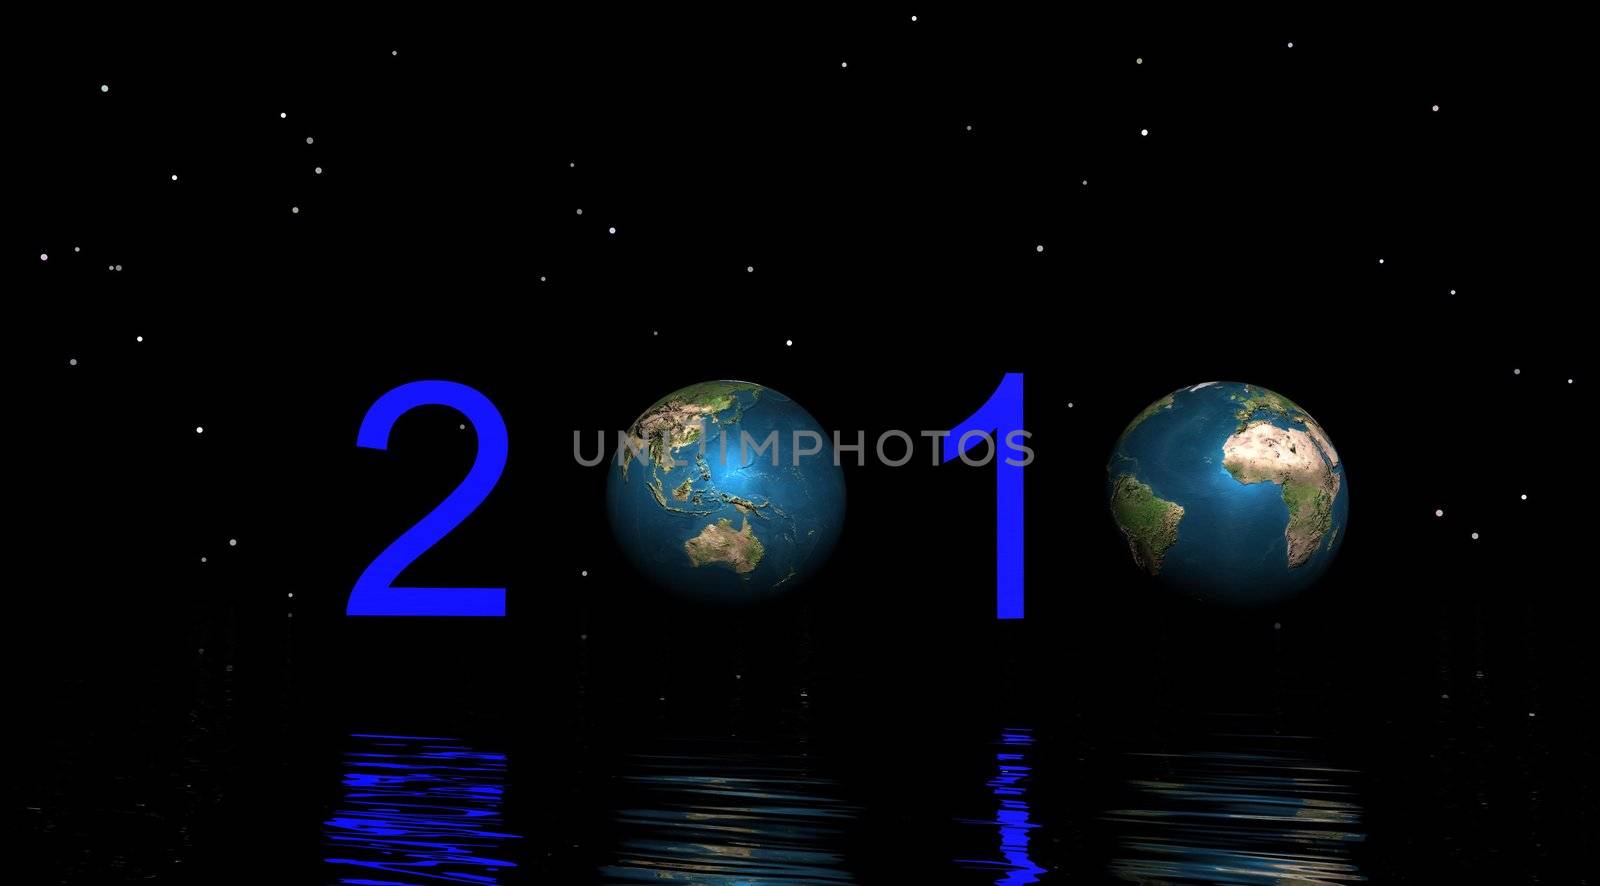 happy new year 2010 by mariephotos